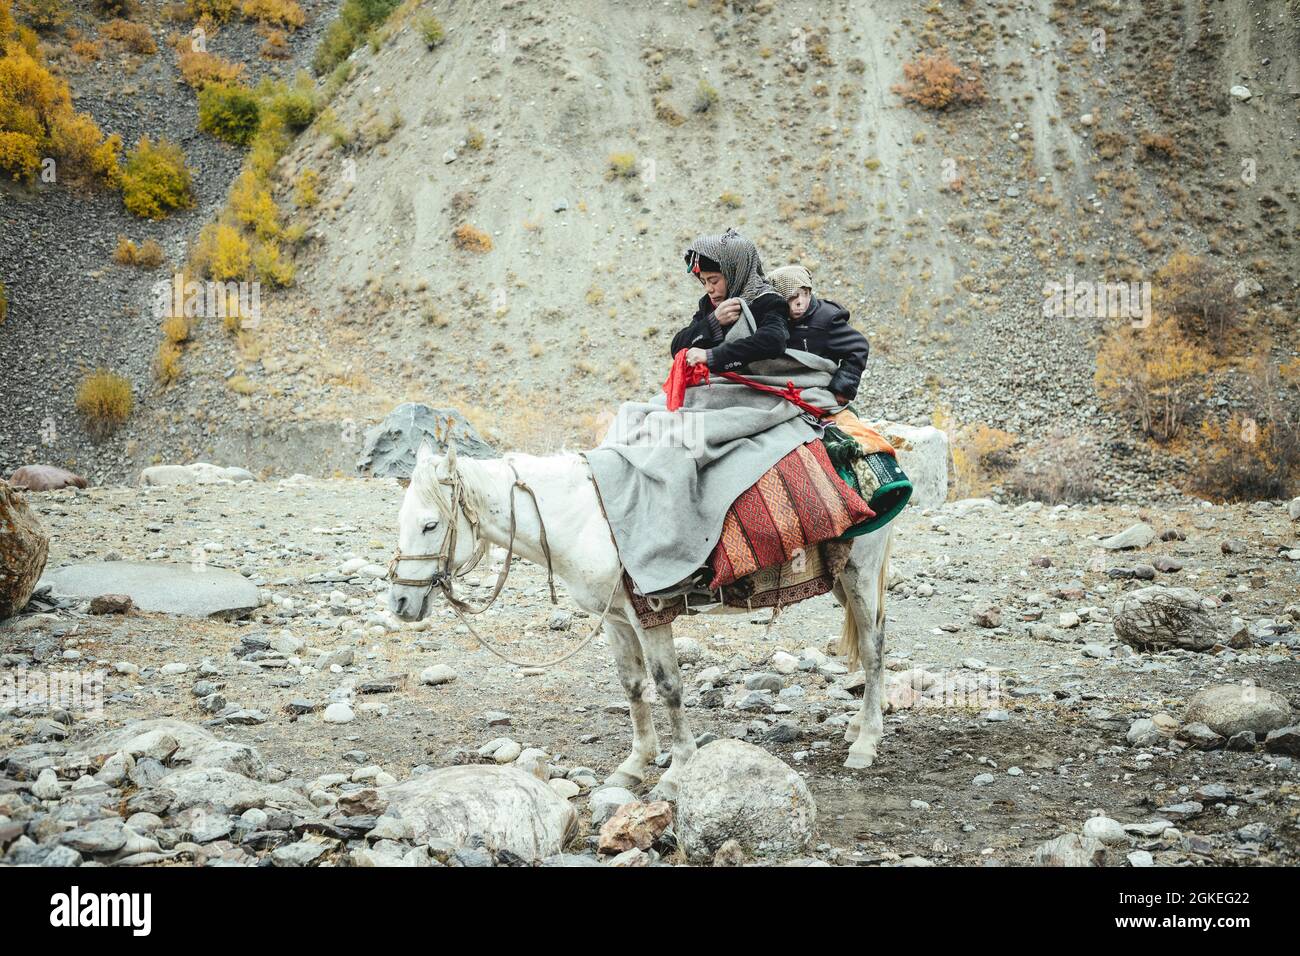 A boy with his little brother on a white horse, Kyrgyz nomads, Wakhan Corridor, Badakhshan, Afghanistan Stock Photo